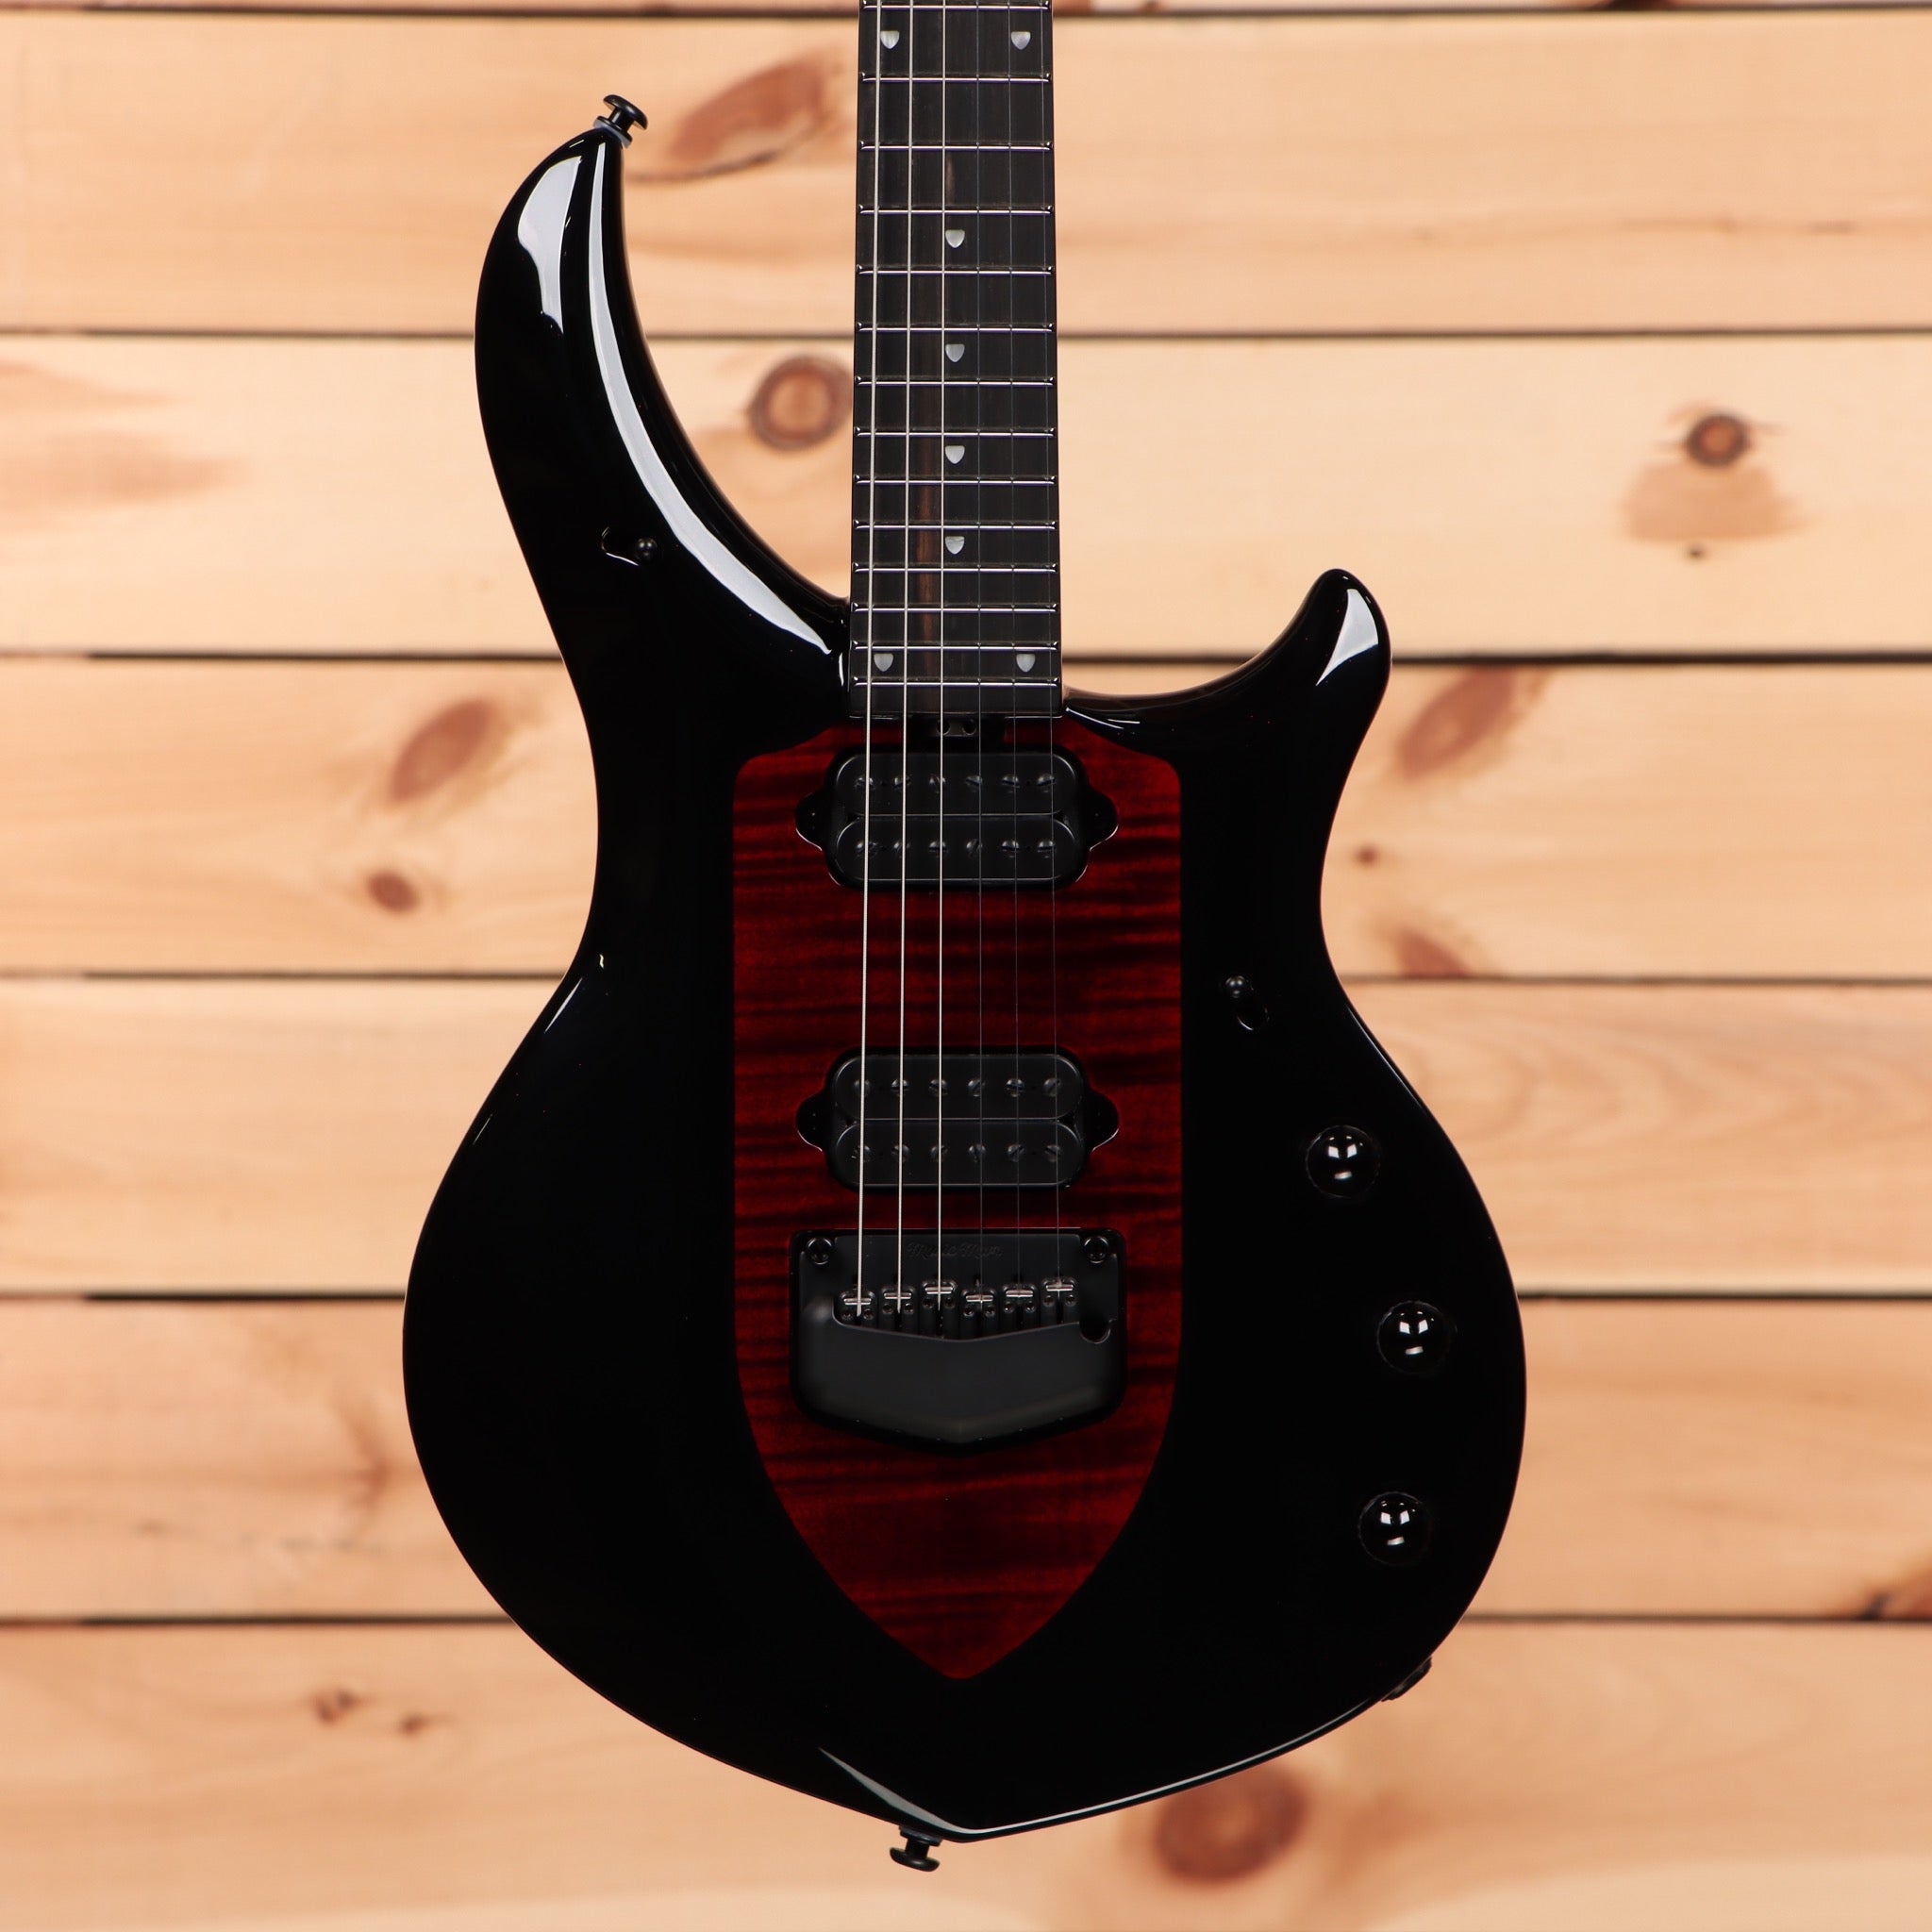 Ernie Ball Music Man Majesty 6 - Sanguine Red – Righteous Guitars